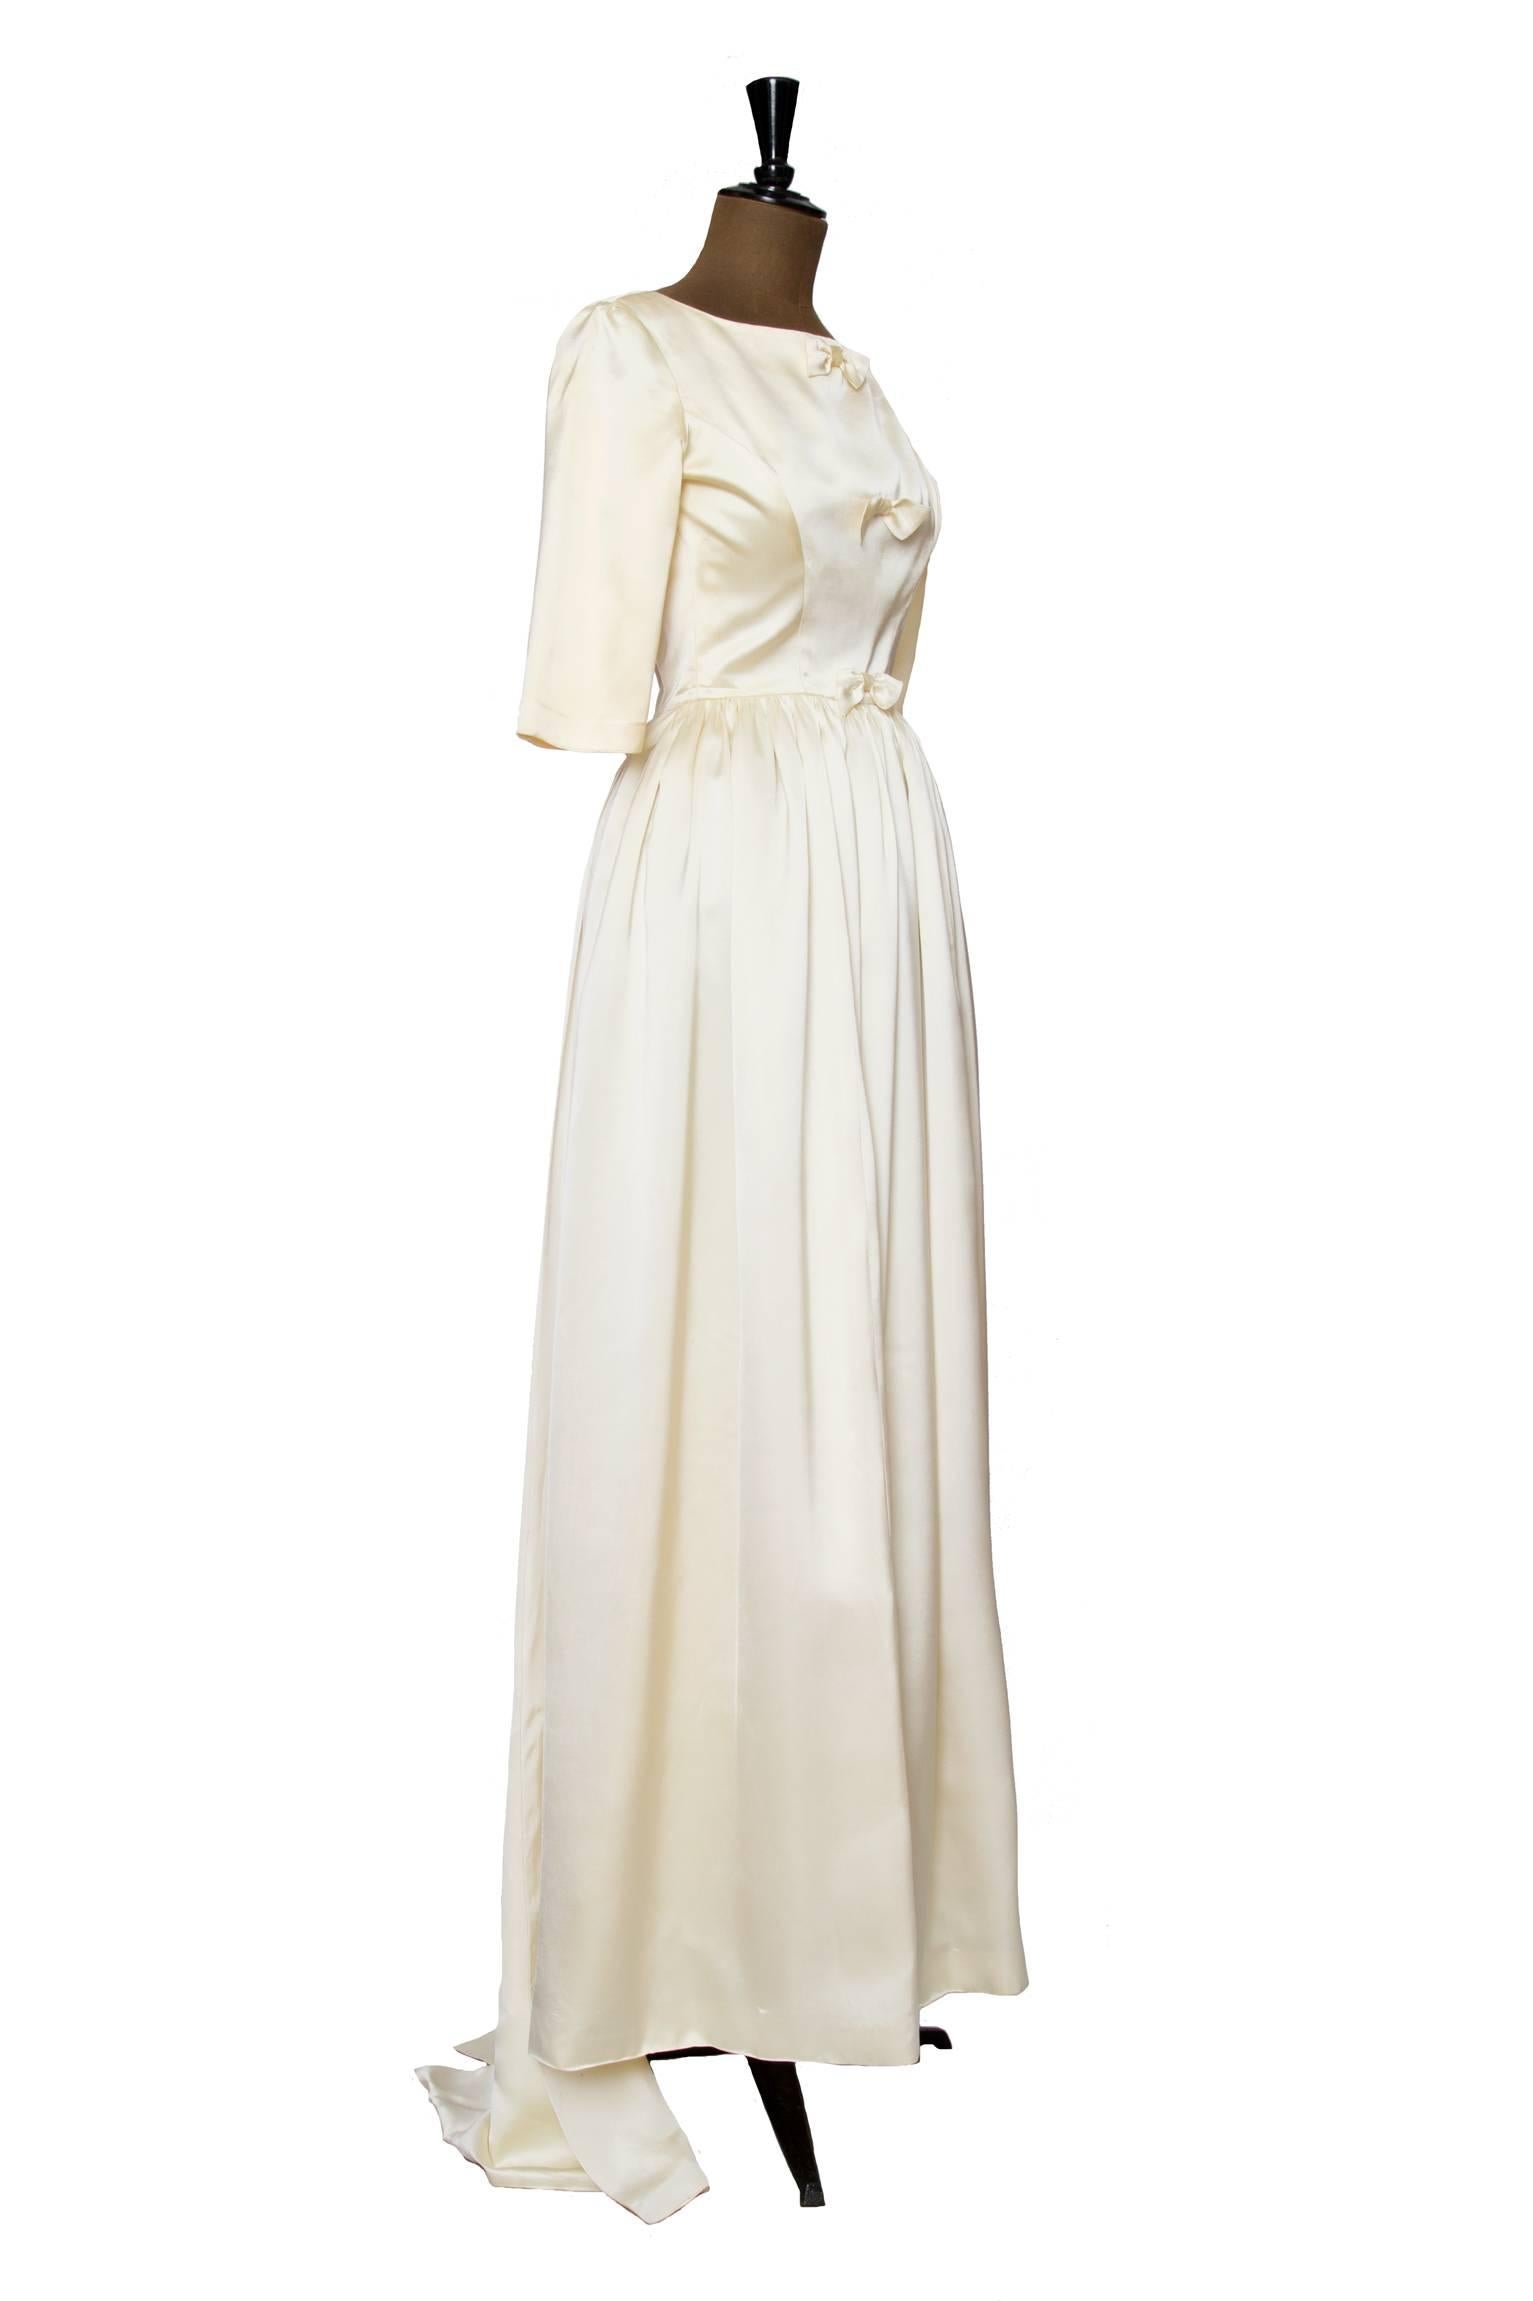 A gorgeous 1960s Maggy Rouff heavy silk wedding gown with a full floor length skirts and three quarter length sleeves. The structured bodice is embellished with a vertical row of three identical bows. On the back a 130 cm split train elegantly falls